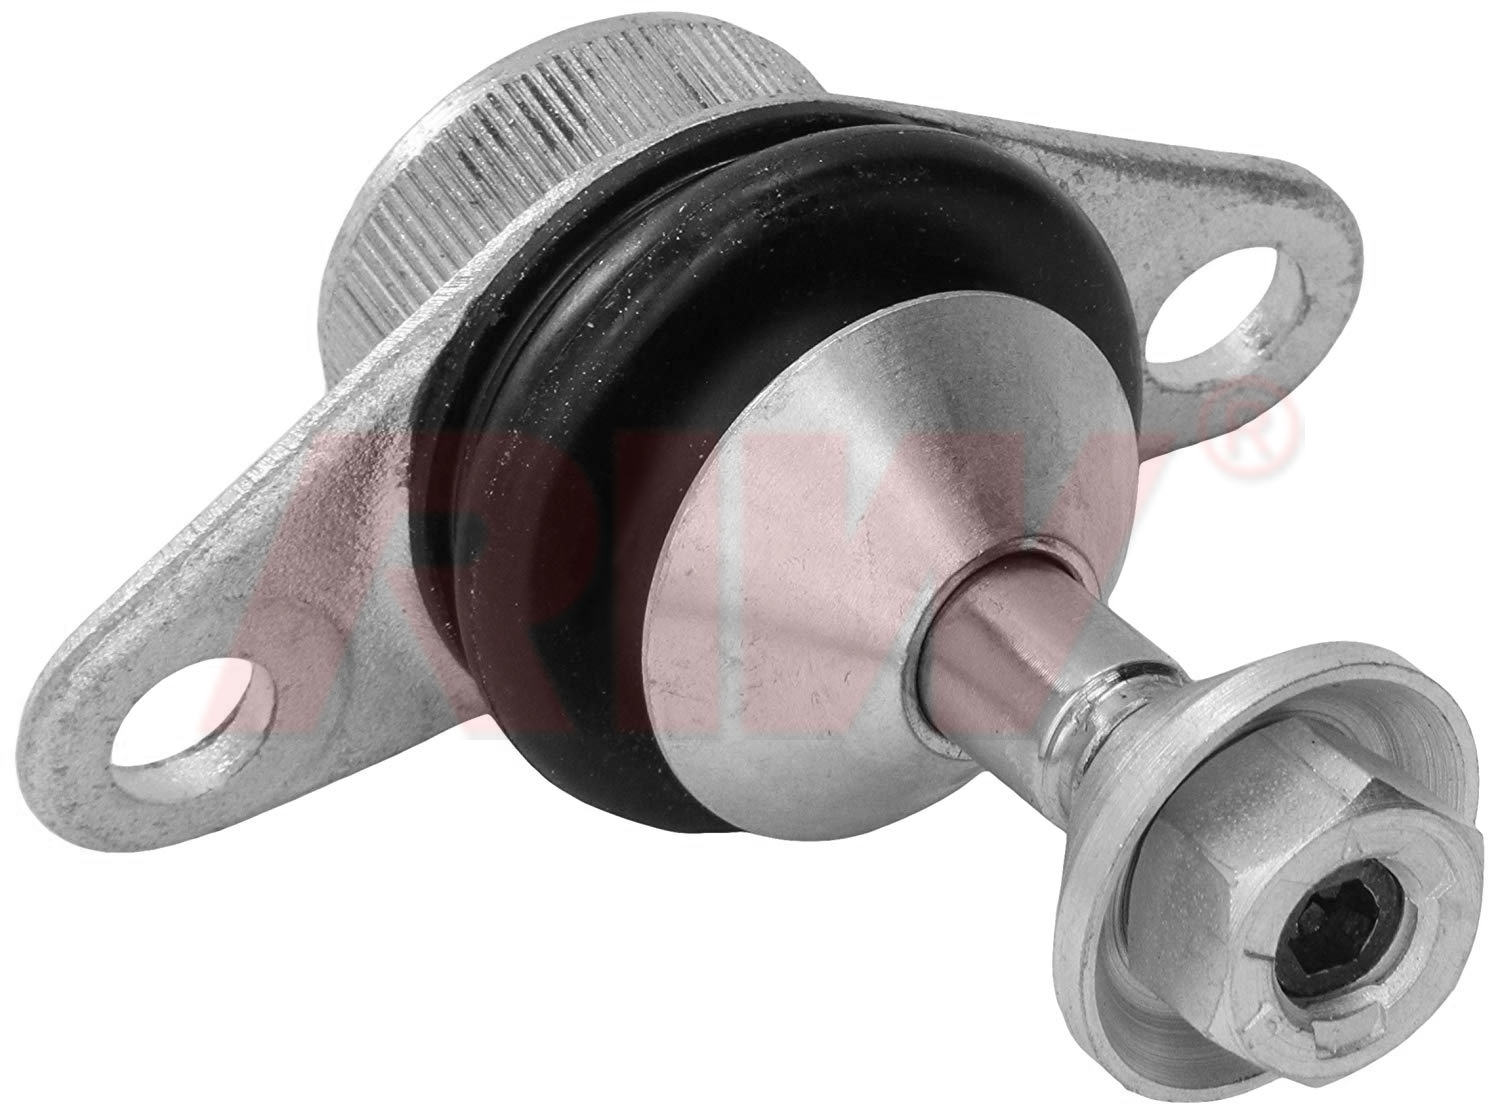 VOLVO XC70 CROSS COUNTRY (II CROSS COUNTRY) 2000 - 2007 Ball Joint